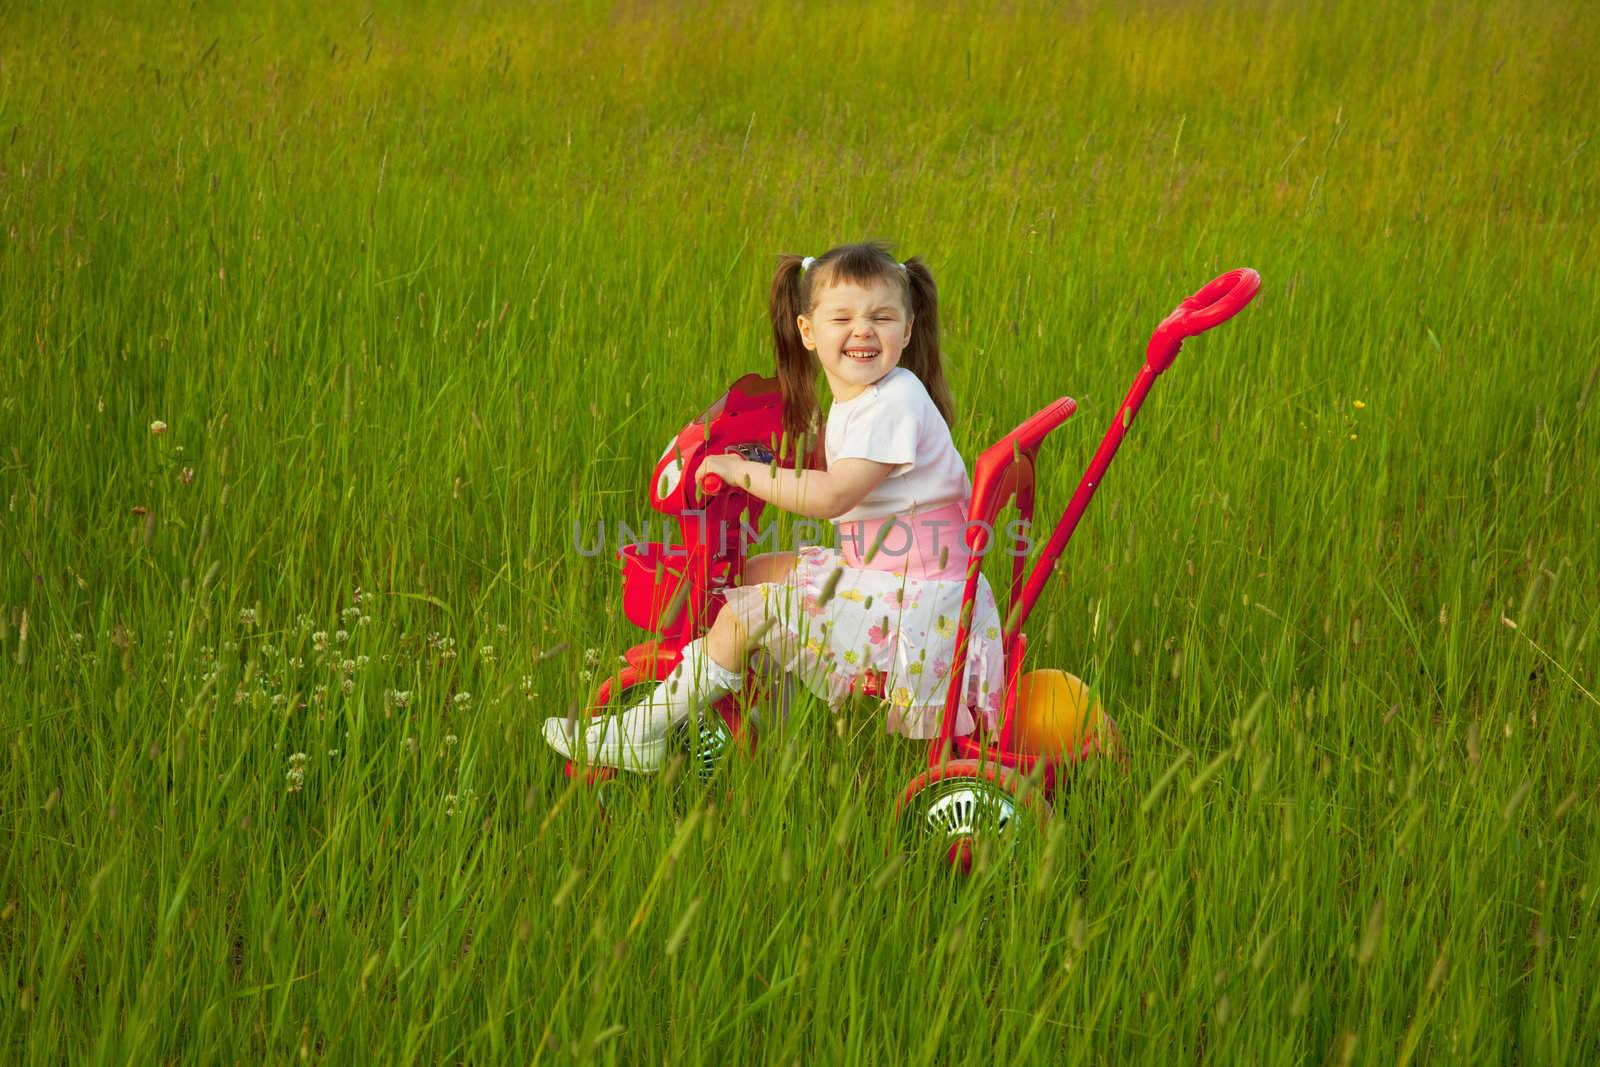 The comical child goes across the field on a bicycle and grimace